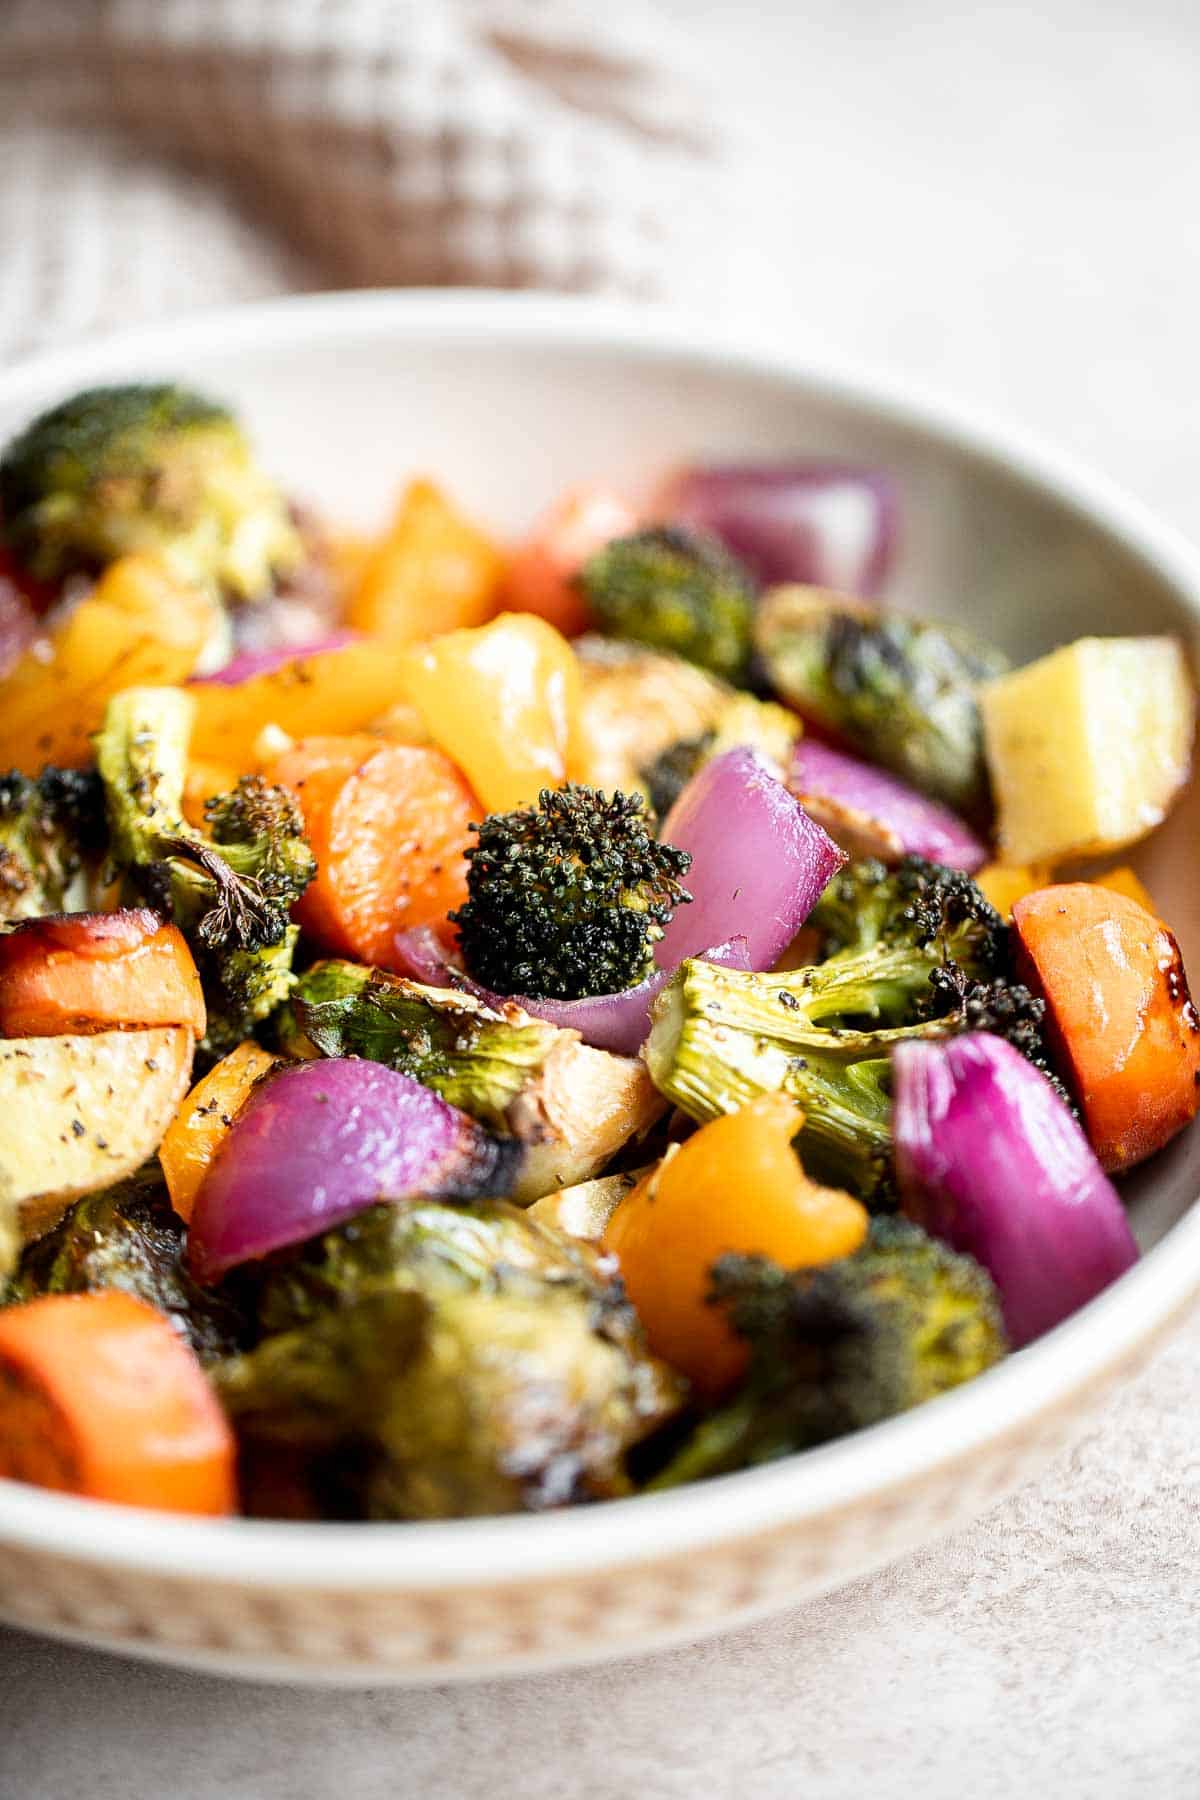 Oven Roasted Vegetables are a delicious flavorful side dish that goes well with almost any dinner main. Customize it with whatever veggies you have on hand. | aheadofthyme.com